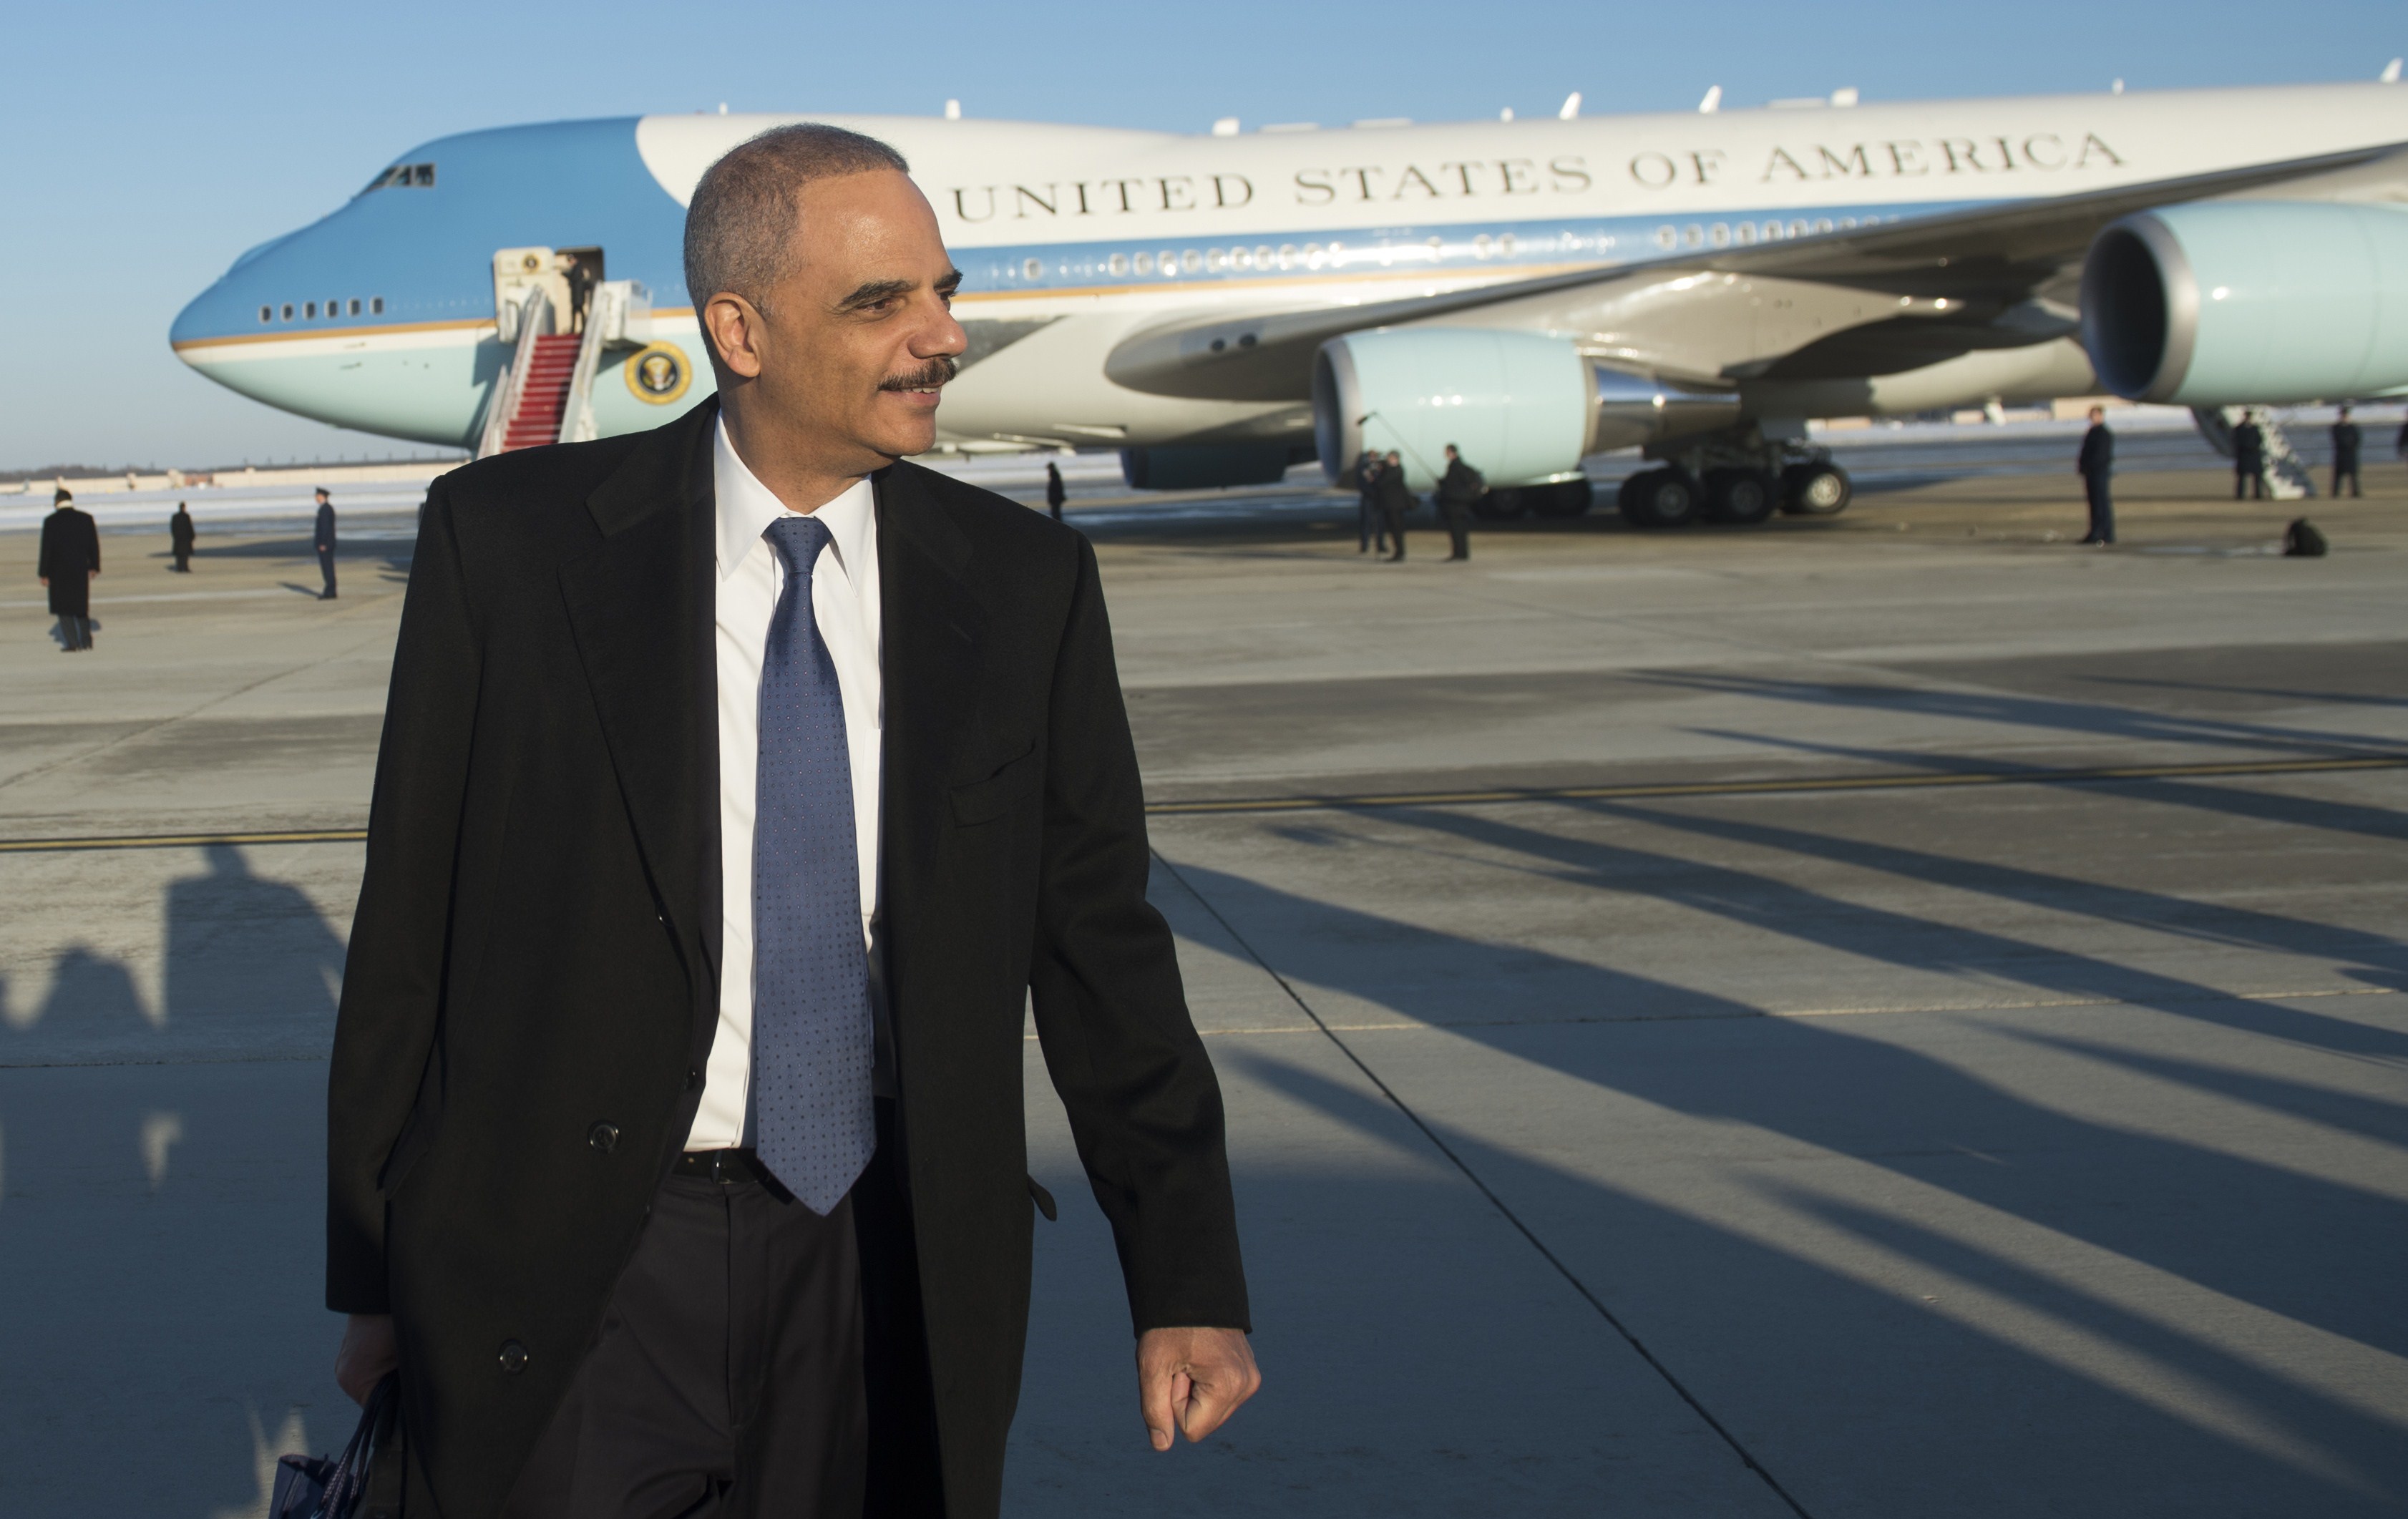 Attorney General Eric Holder walks from Air Force One after arriving with US President Barack Obama at Andrews Air Force Base in Maryland, March 6, 2015. ((Saul Loeb—AFP/Getty Images))